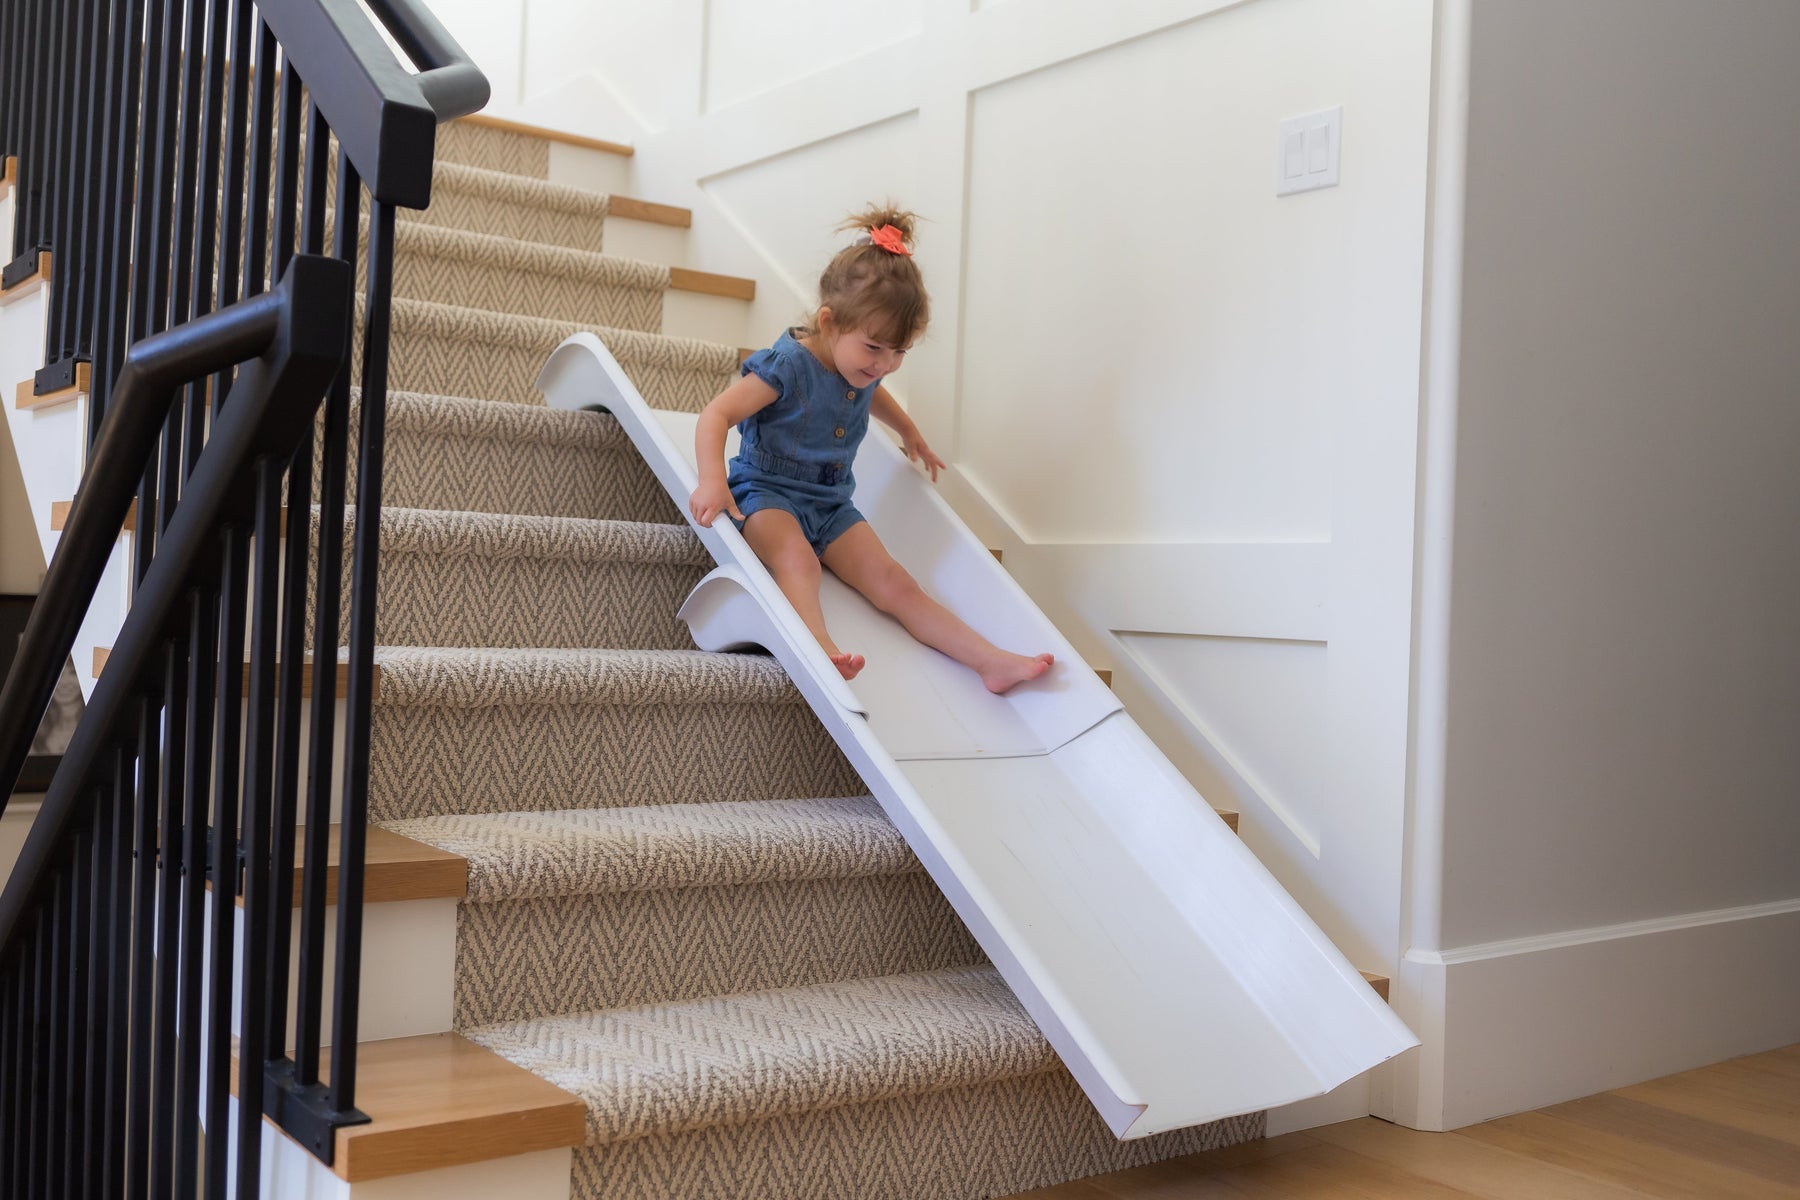 Stairslide Original Stair Mounted Kids Indoor Home Staircase Slide Playset  with Self Anchoring Non Slip Grips for 9 to 12 Stairs, Cream